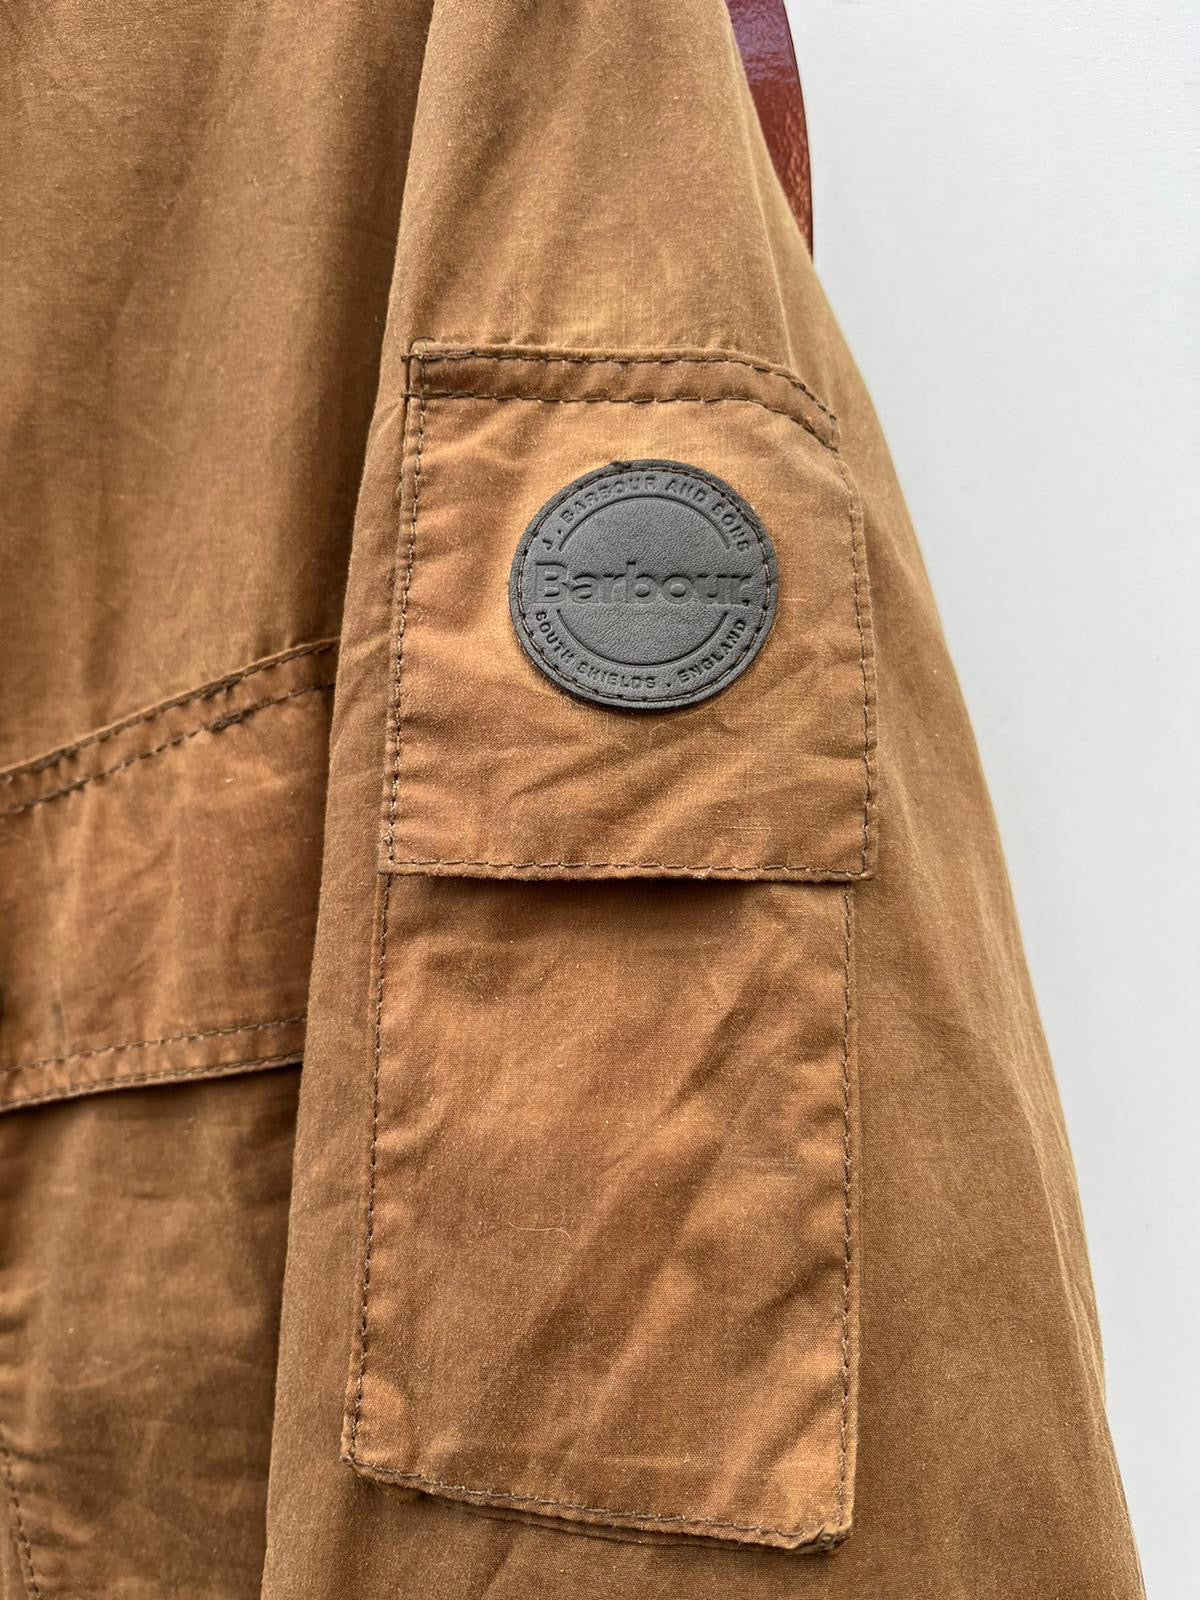 Patch Barbour in pelle - Barbour leather brown patch